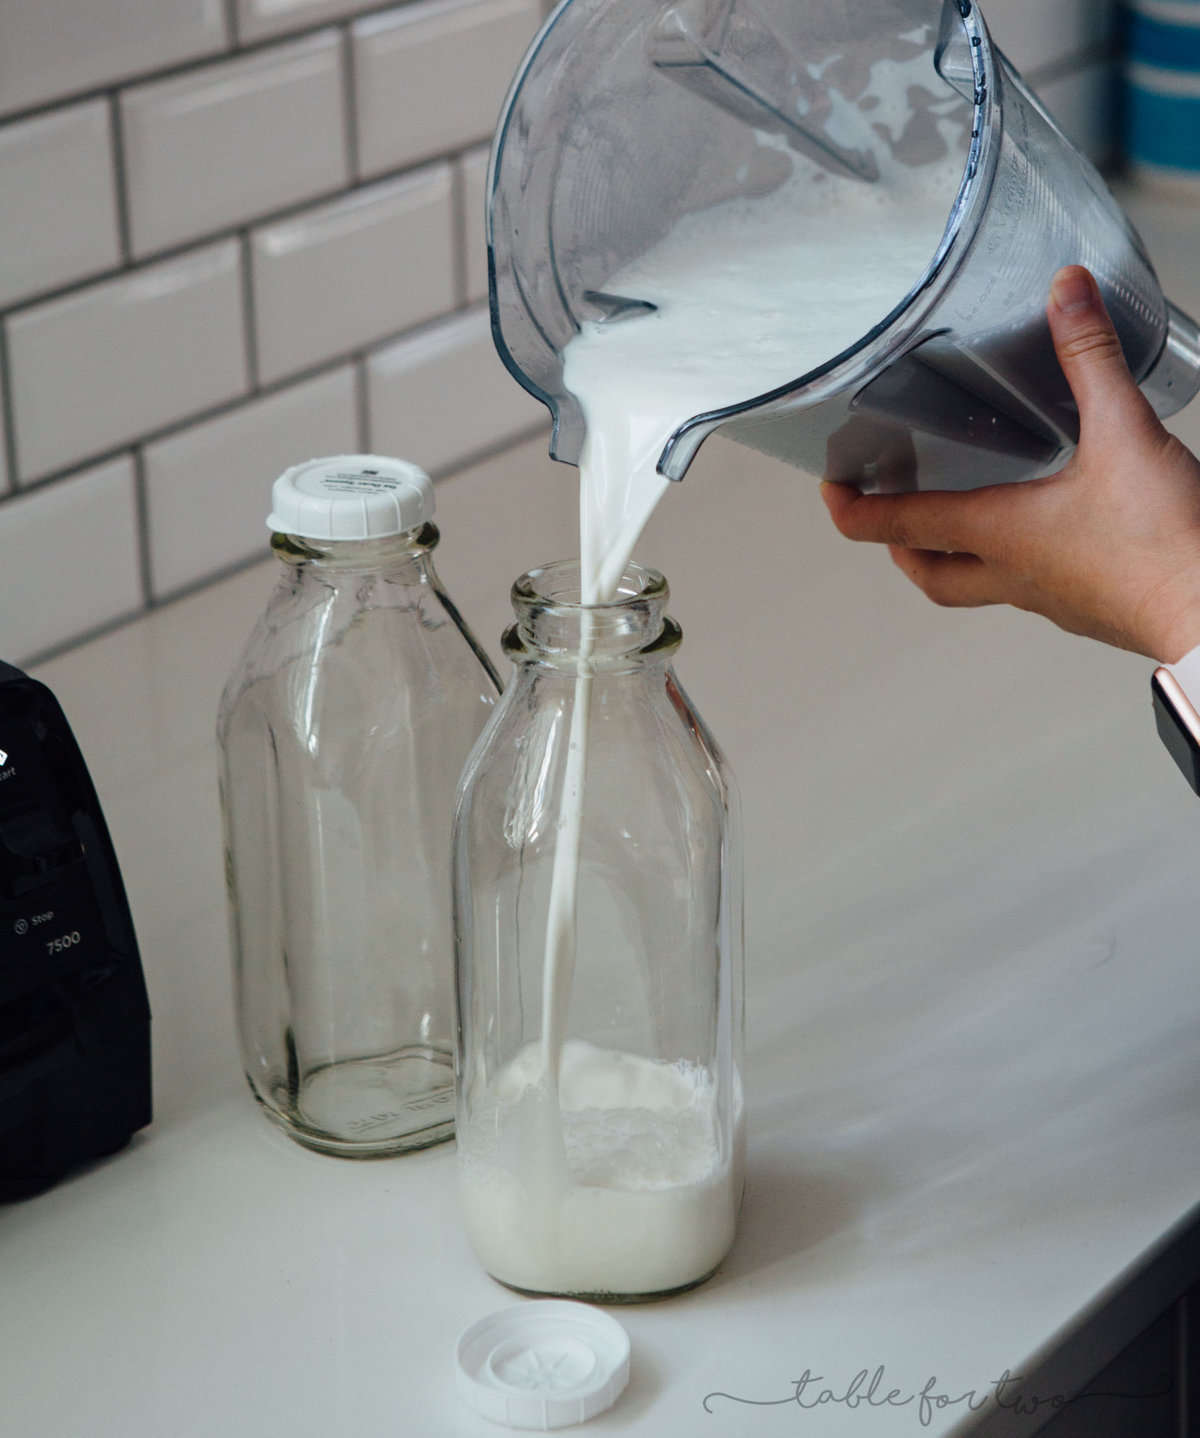 Making your own almond (milk) beverage at home is super easy and it seriously tastes so much cleaner and better than the store-bought kind. You know exactly what goes into it — almonds and water — and you can add additional flavors if you desire!